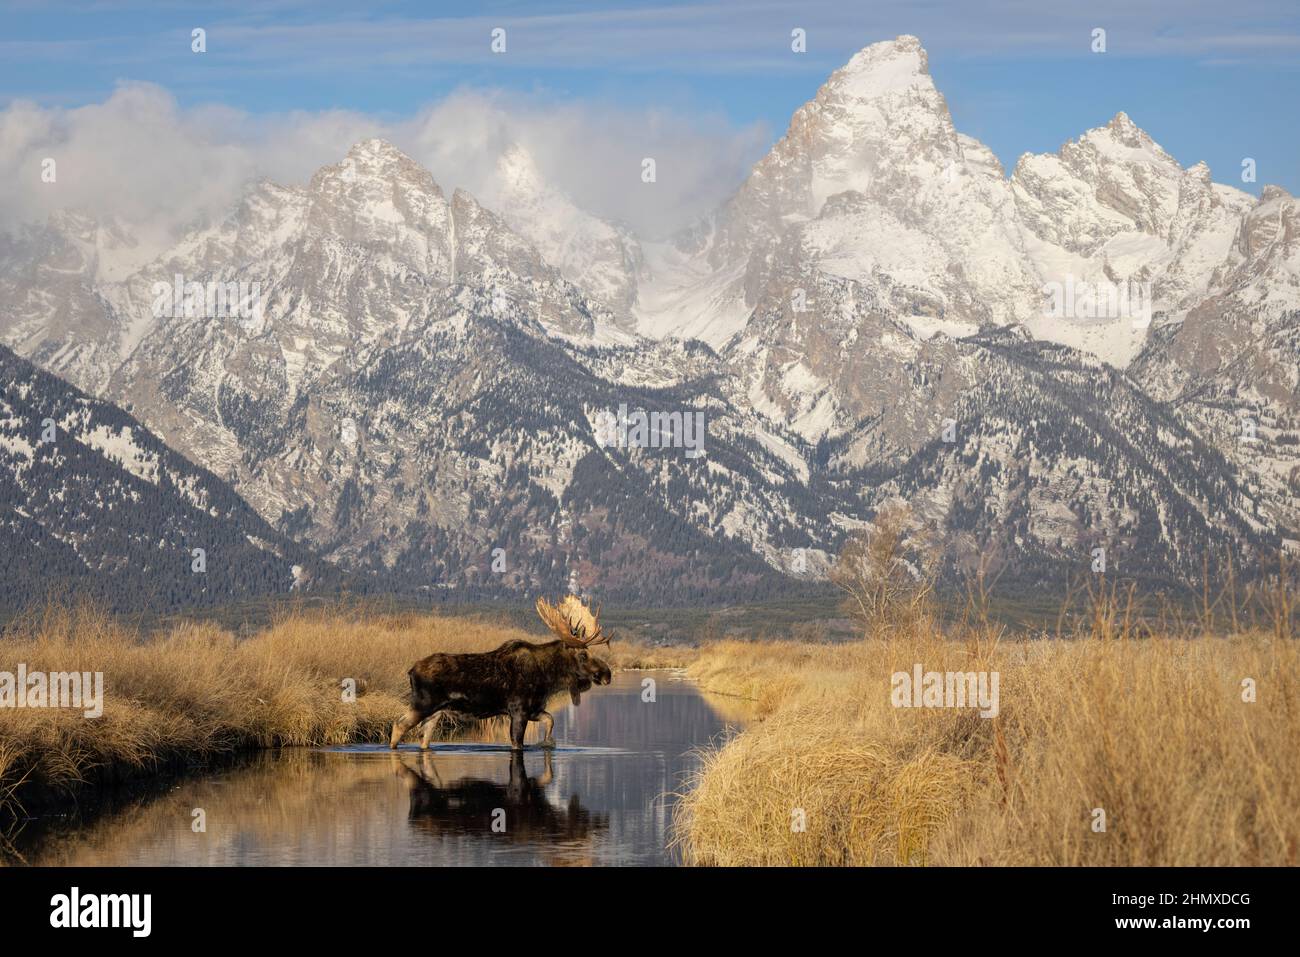 Shiras Moose (Alces alces), Grand Teton National Park, Wyoming. Bull crossing water with Teton backdrop Stock Photo